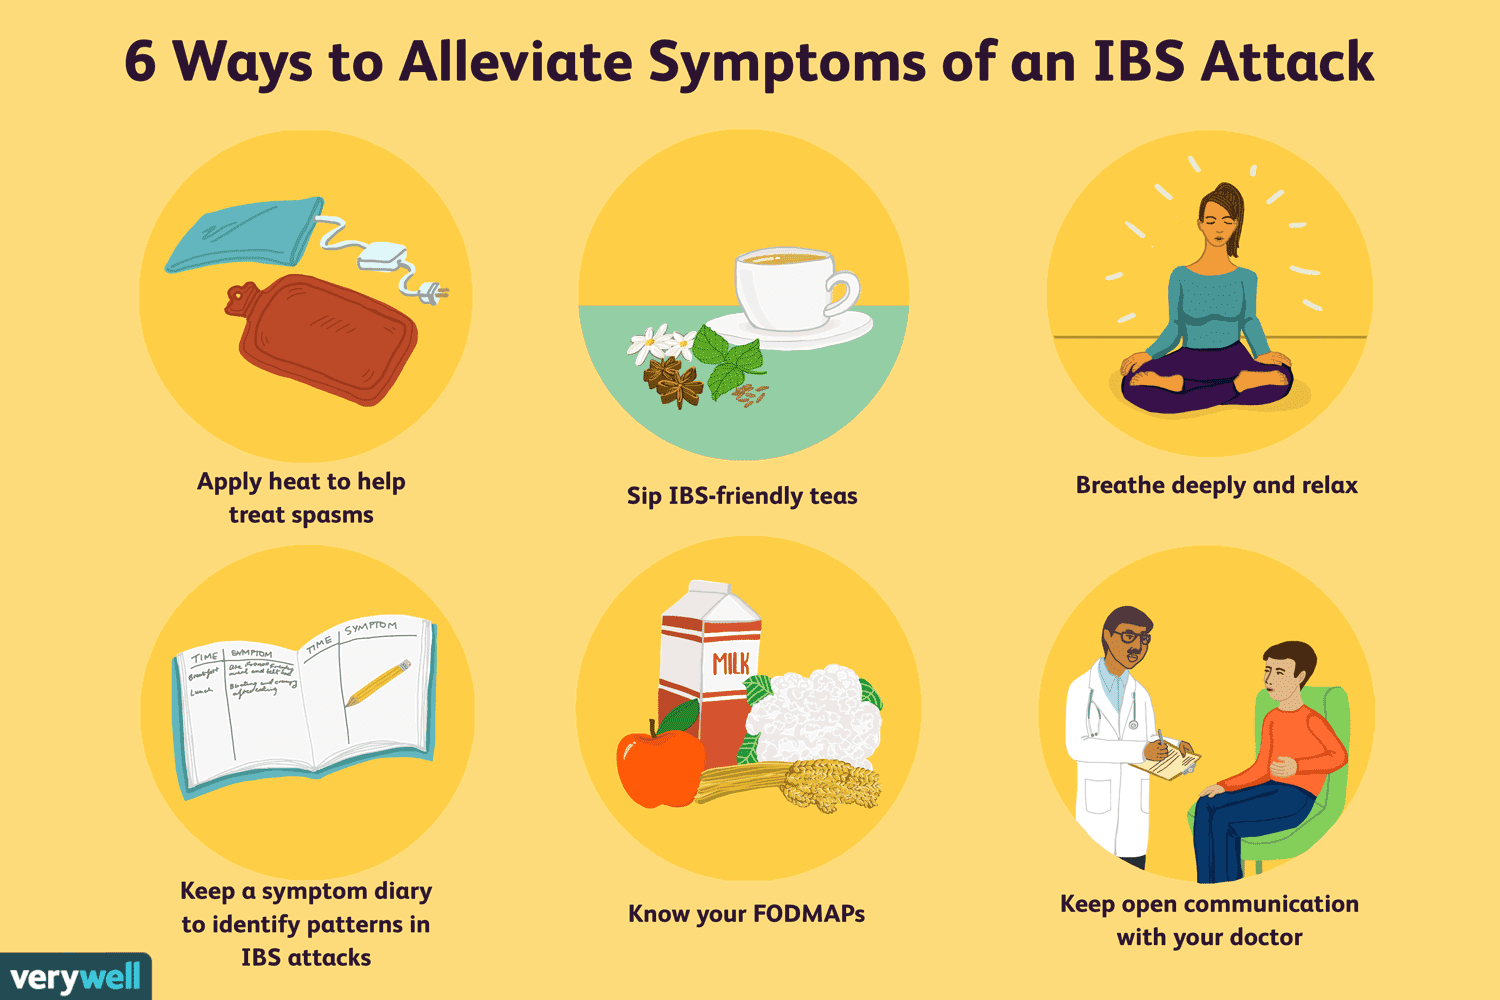 How to Deal With an IBS Attack